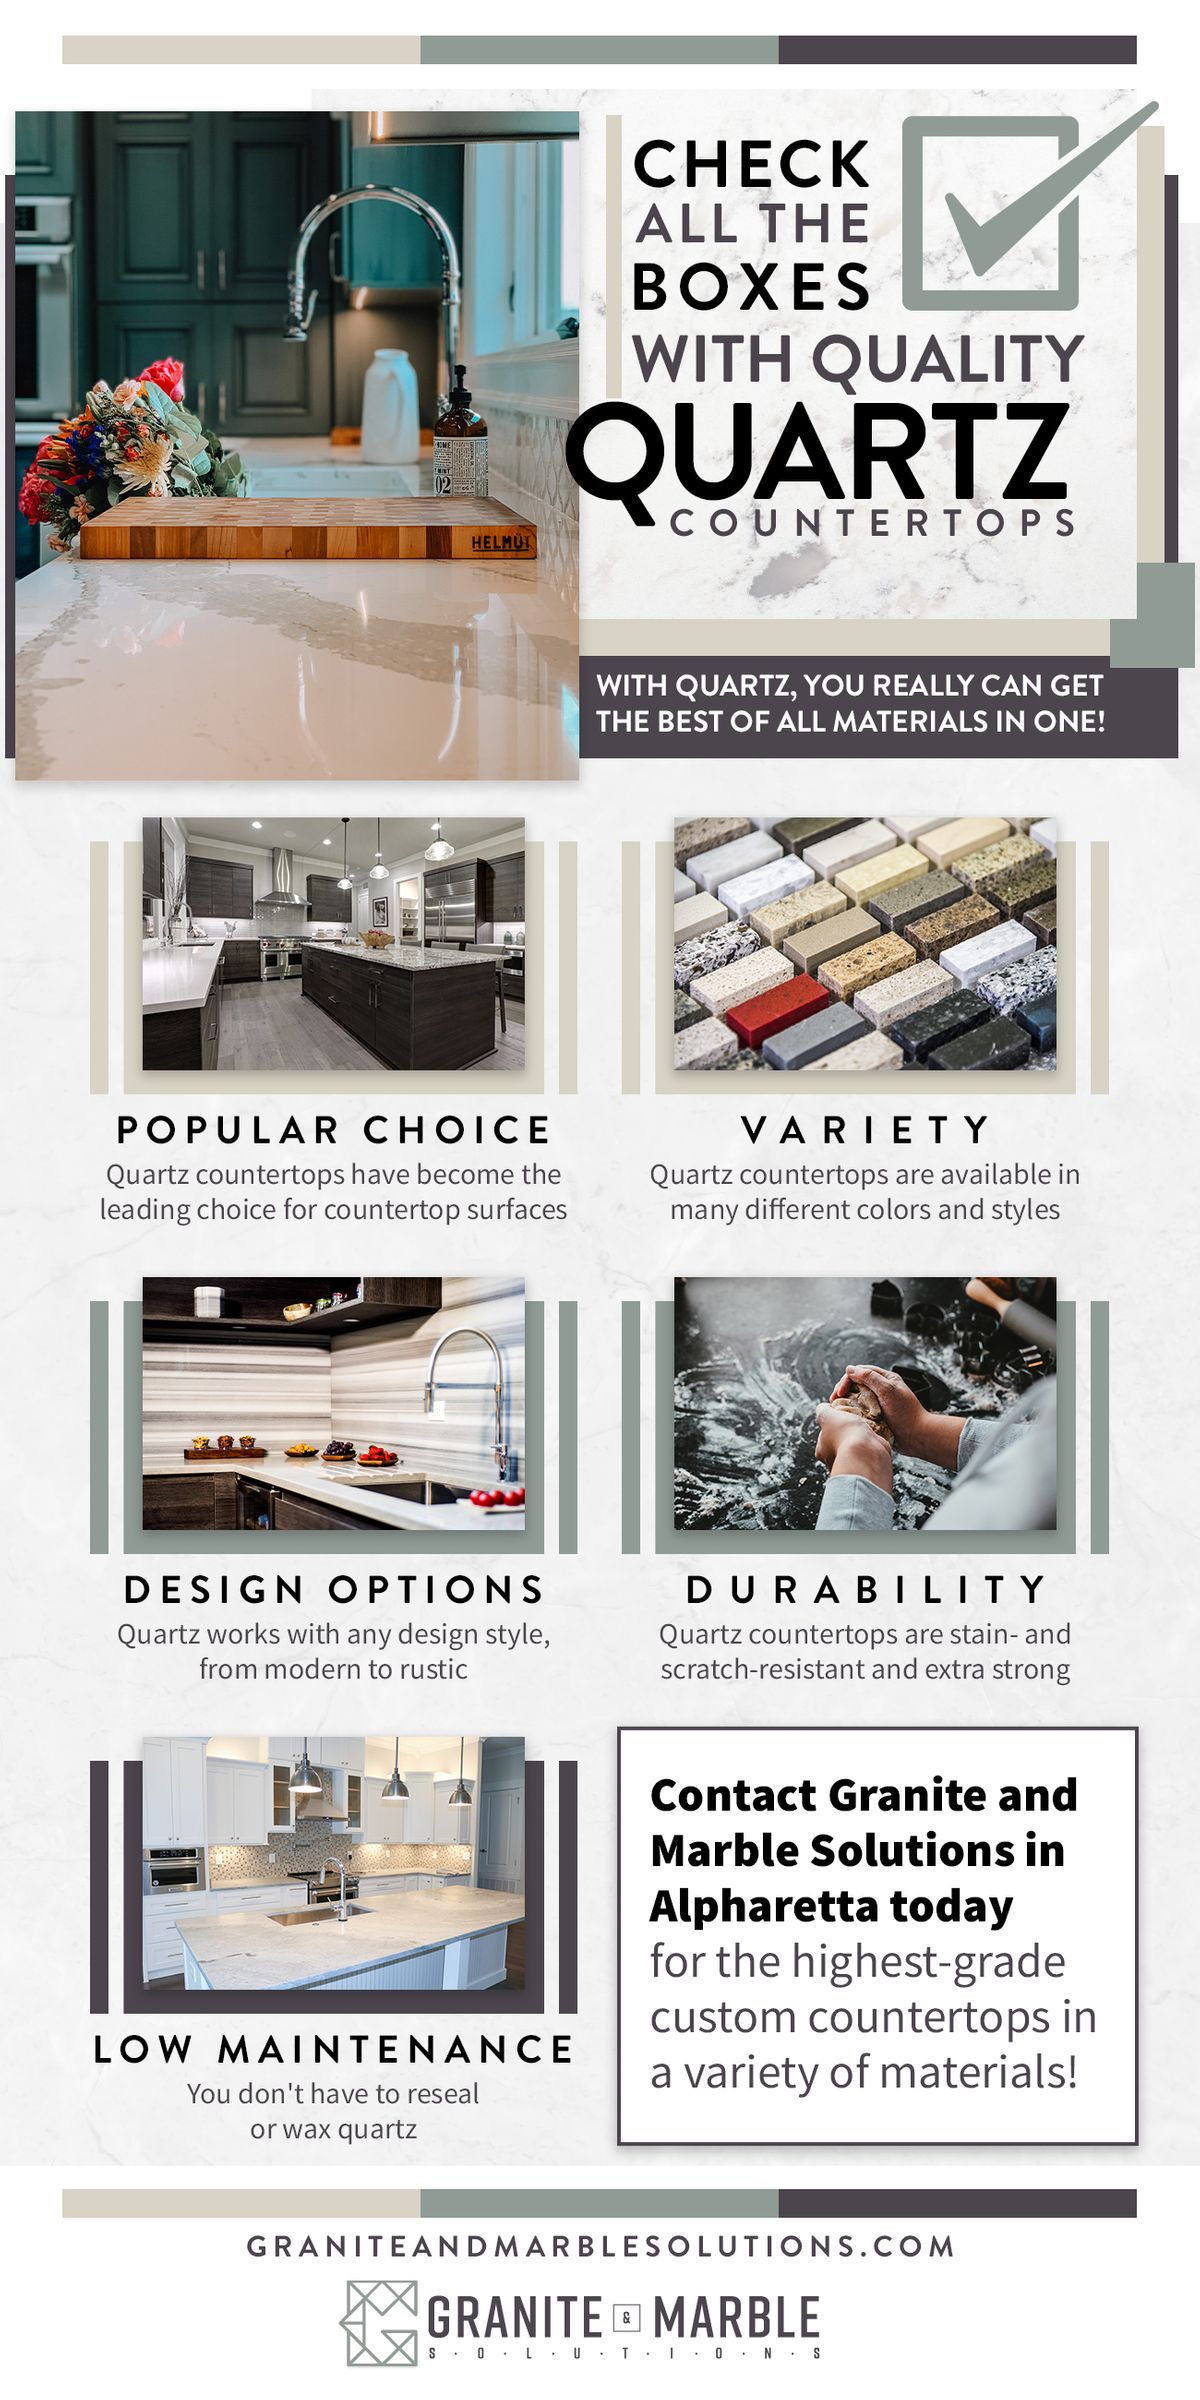 Check All the Boxes with Quality Quartz Countertops